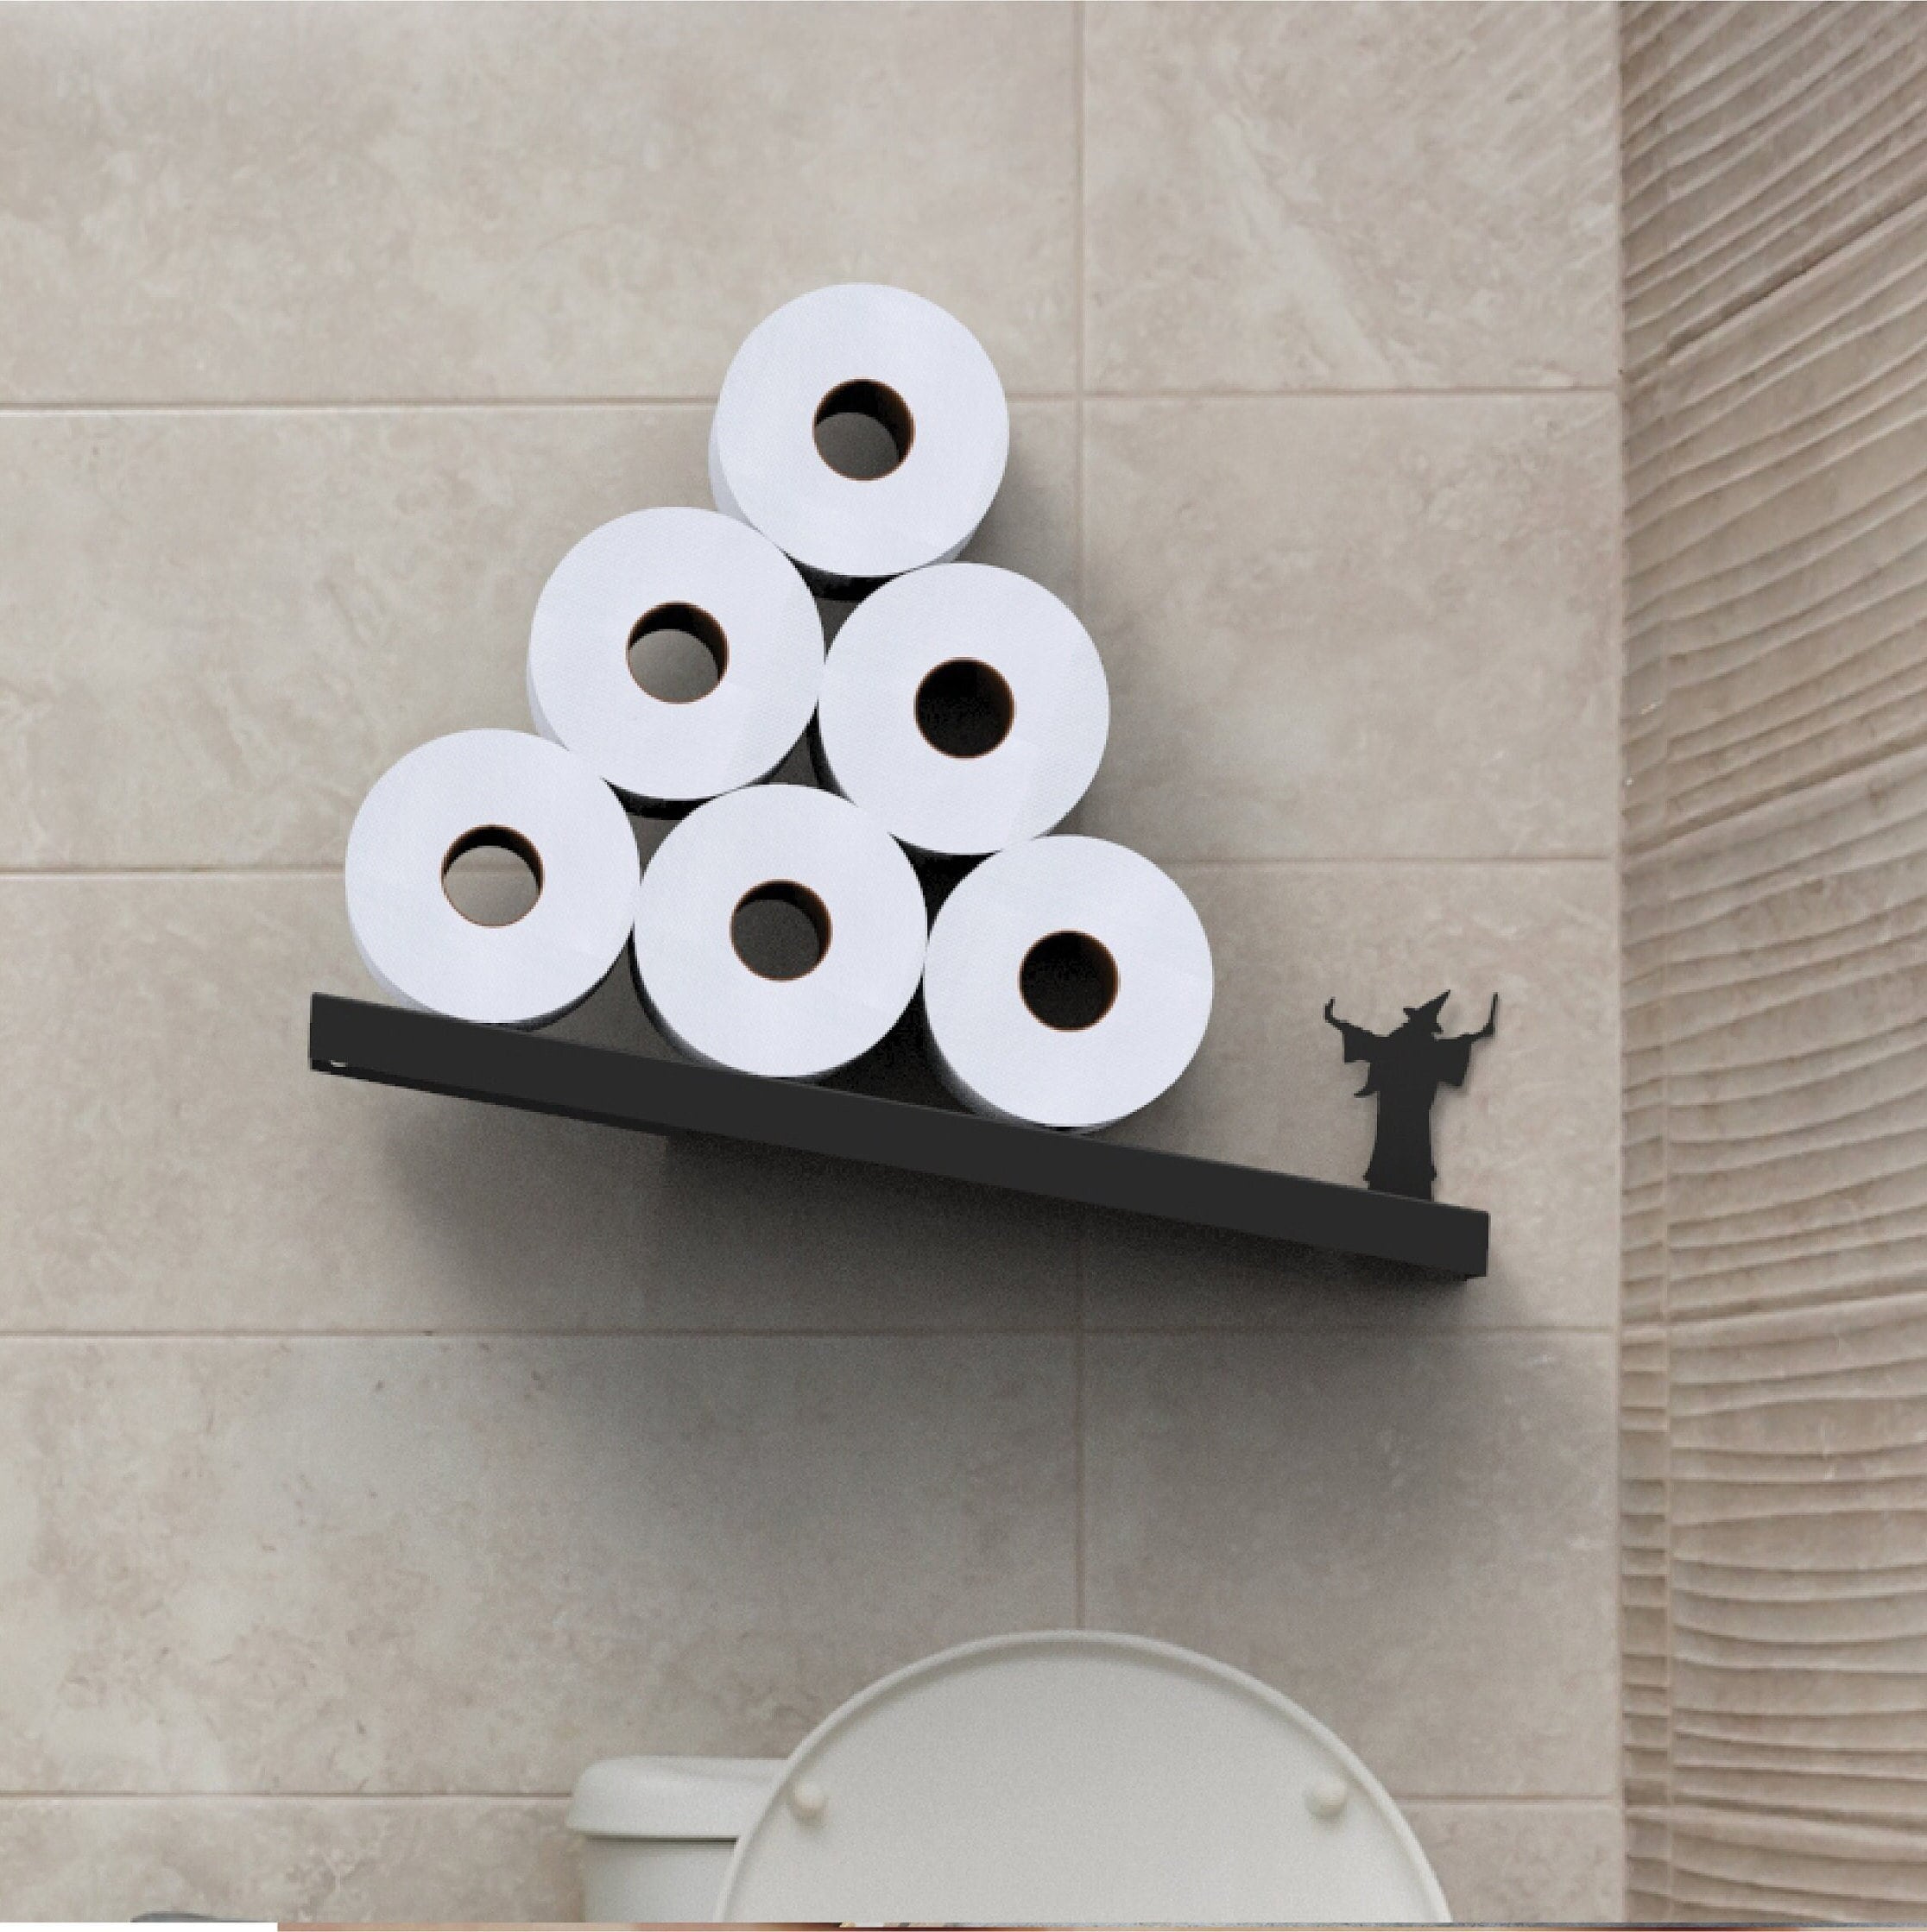 Toilet Paper Holder Shelf and Bathroom AccessoriesDIY Show Off